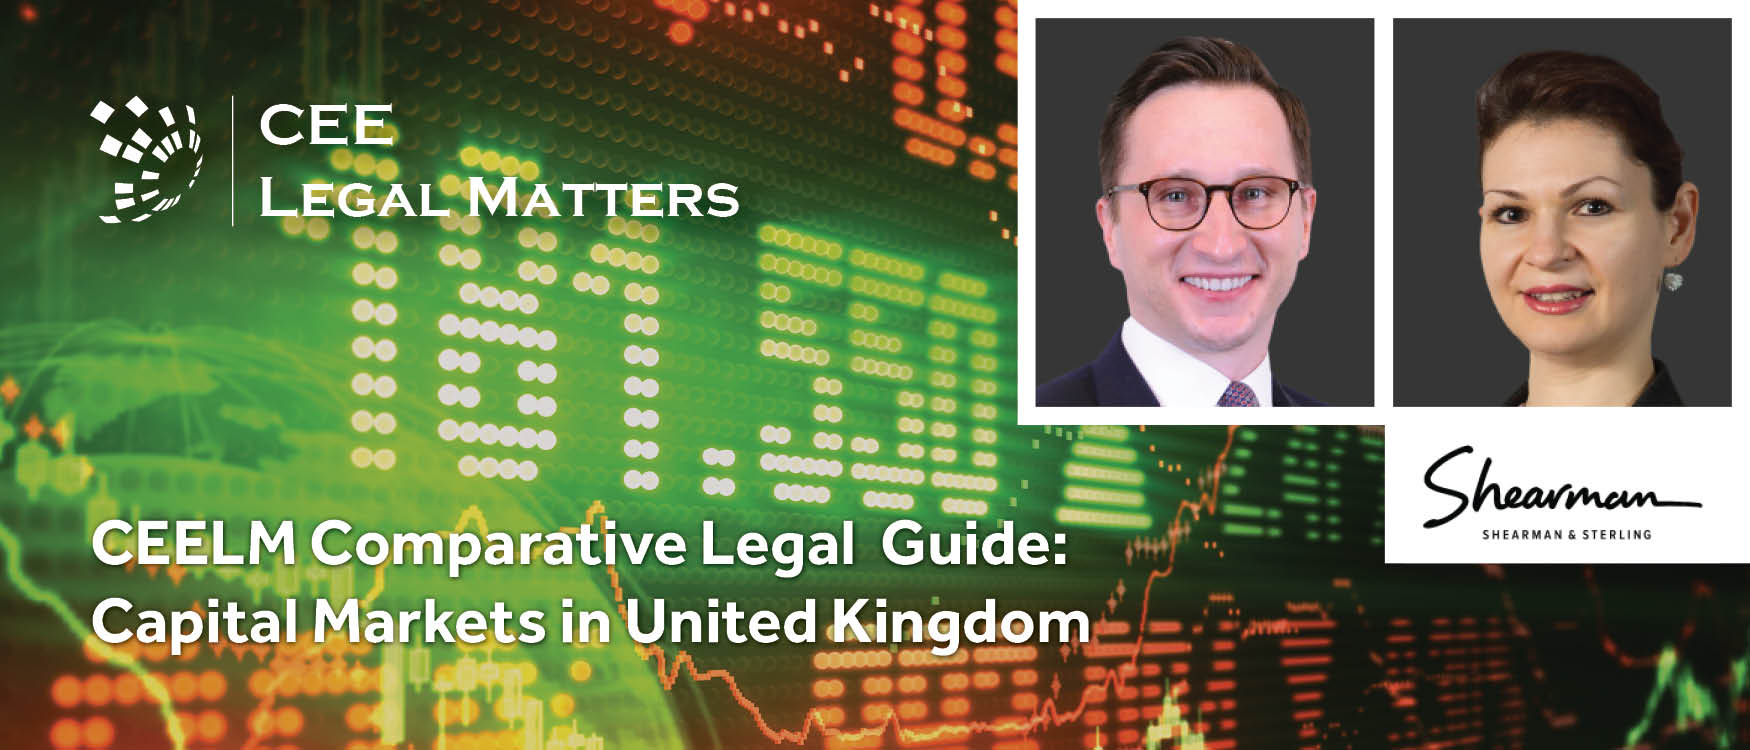 Capital Markets in the United Kingdom